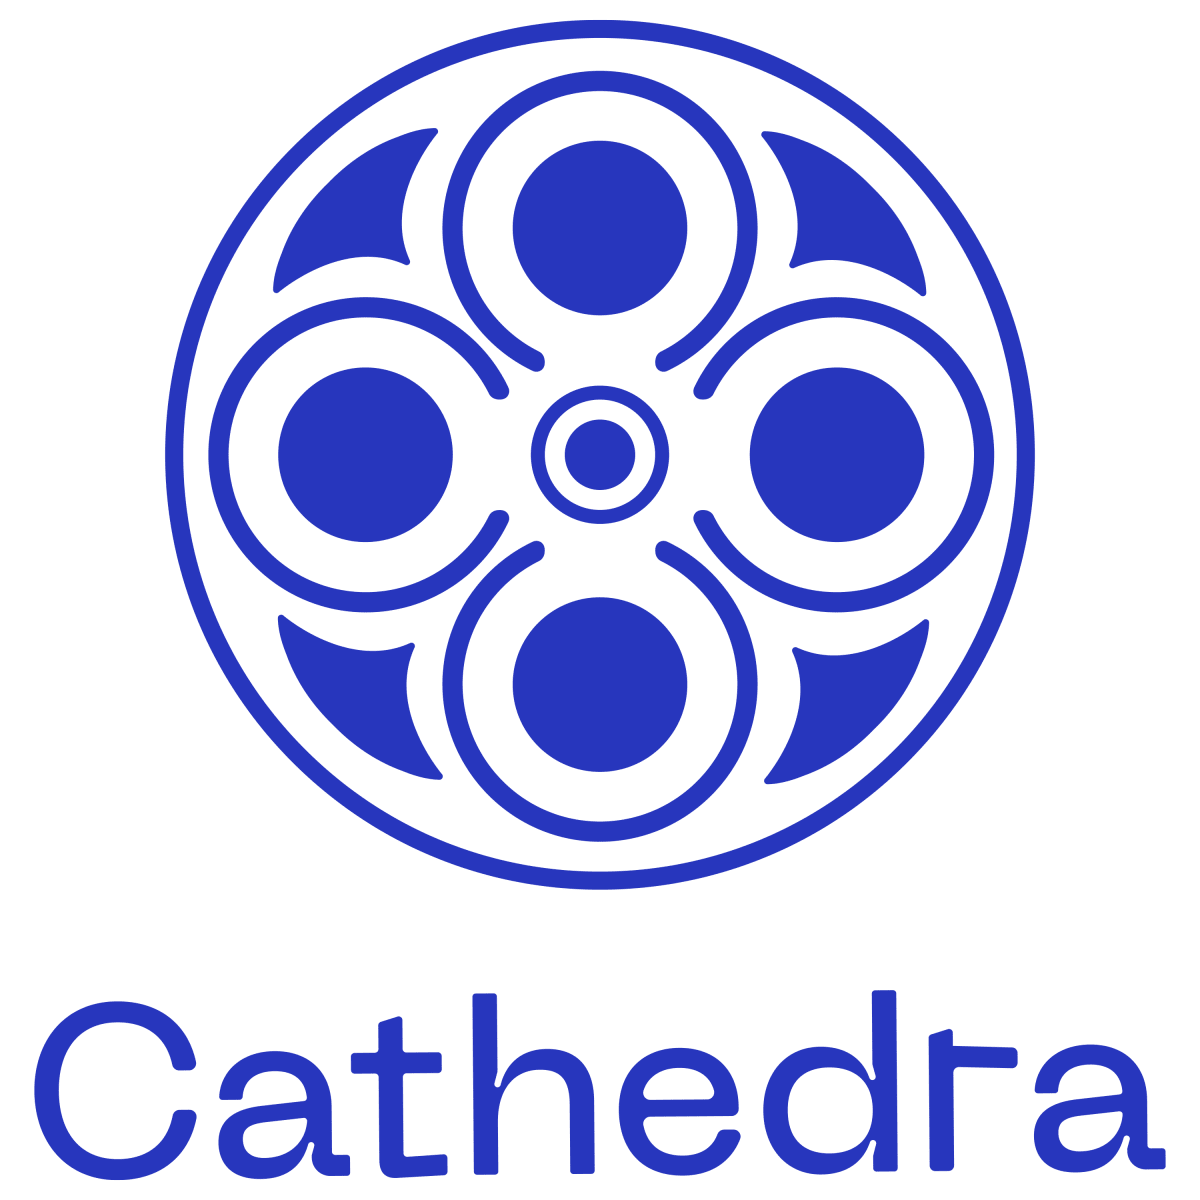 BTC Miner Fortress Technologies Rebrands To Cathedra Bitcoin Inc